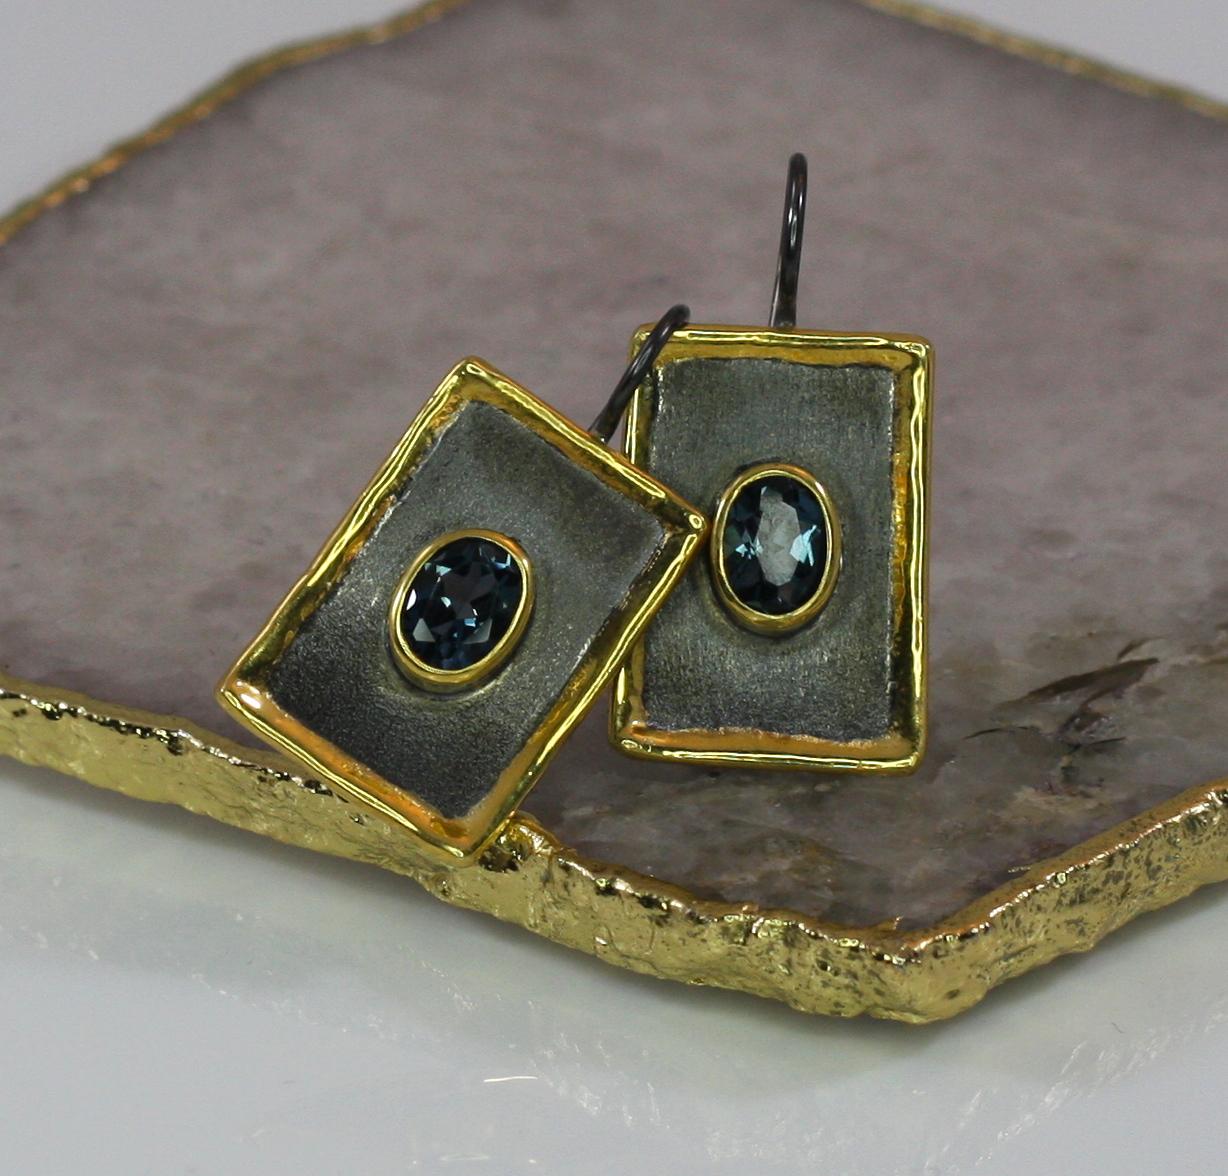 From the Yianni Creations Eclyps Collection, this is a handmade artisan pair of earrings made from fine silver 950 purity finished in Black Rhodium and 24 Karat Gold. Each earring features 1.60 Carat London Blue Topaz in an oval shape, making it